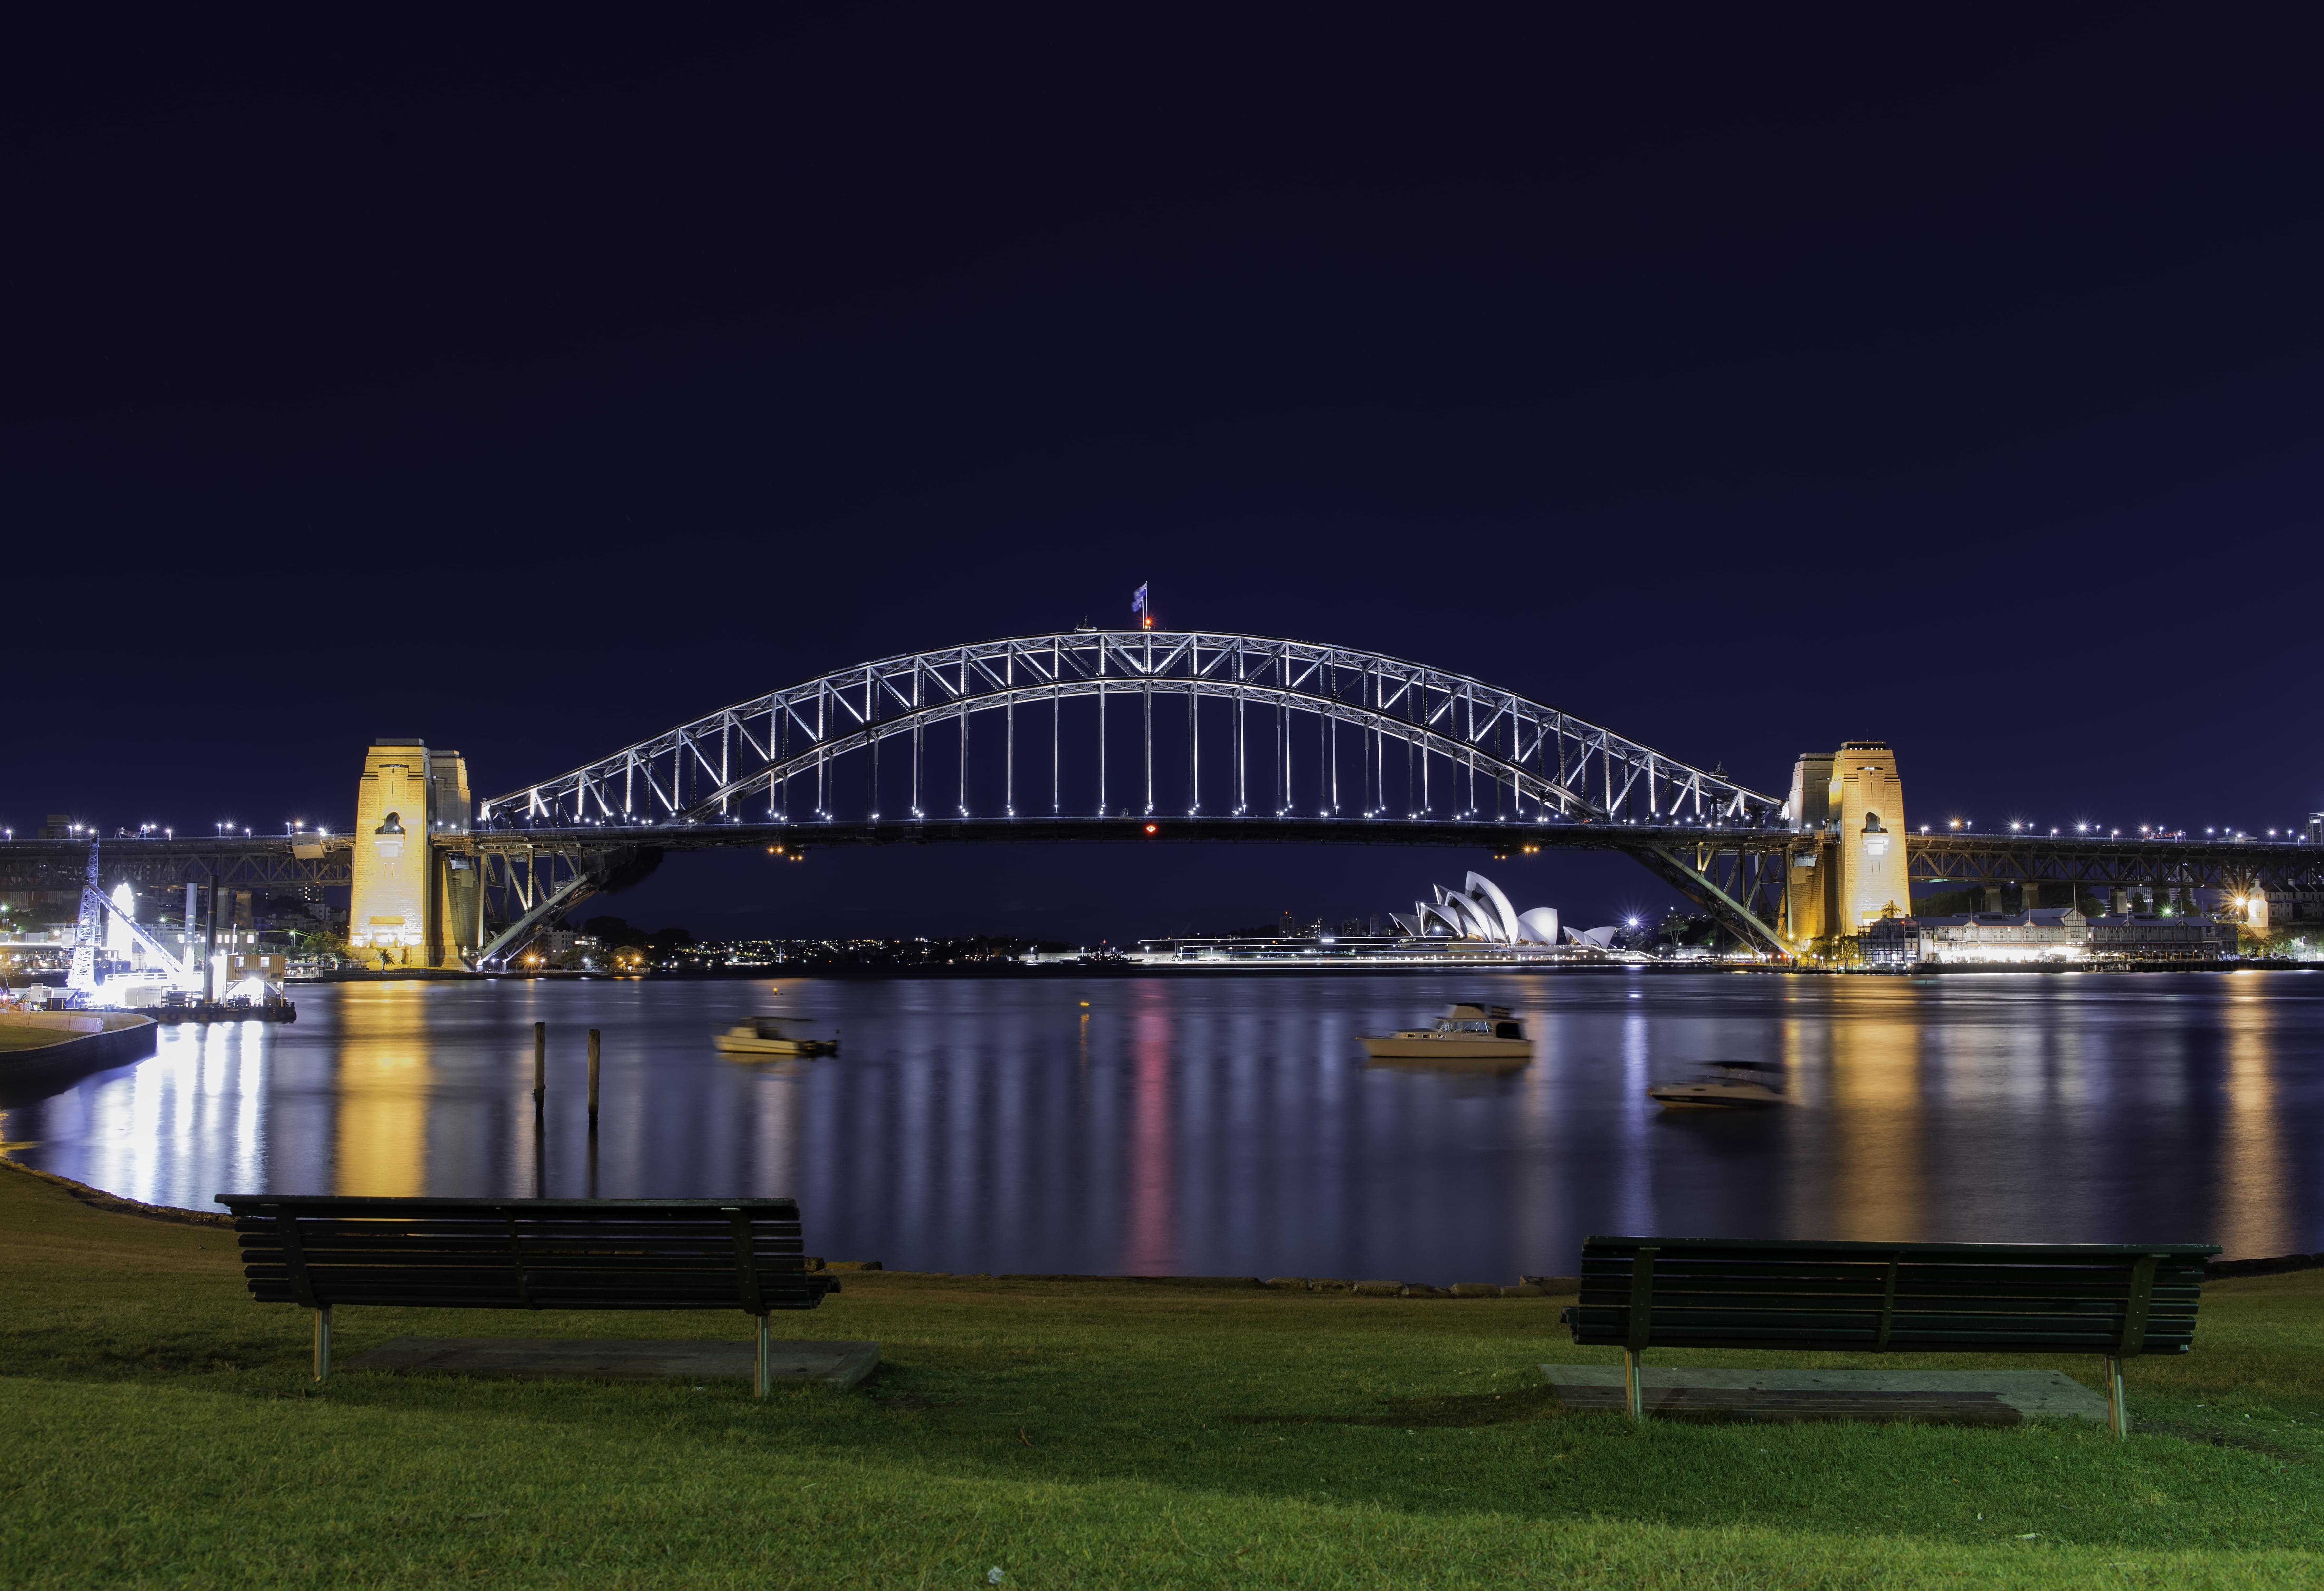 Night view of bridge with boats crossing under during